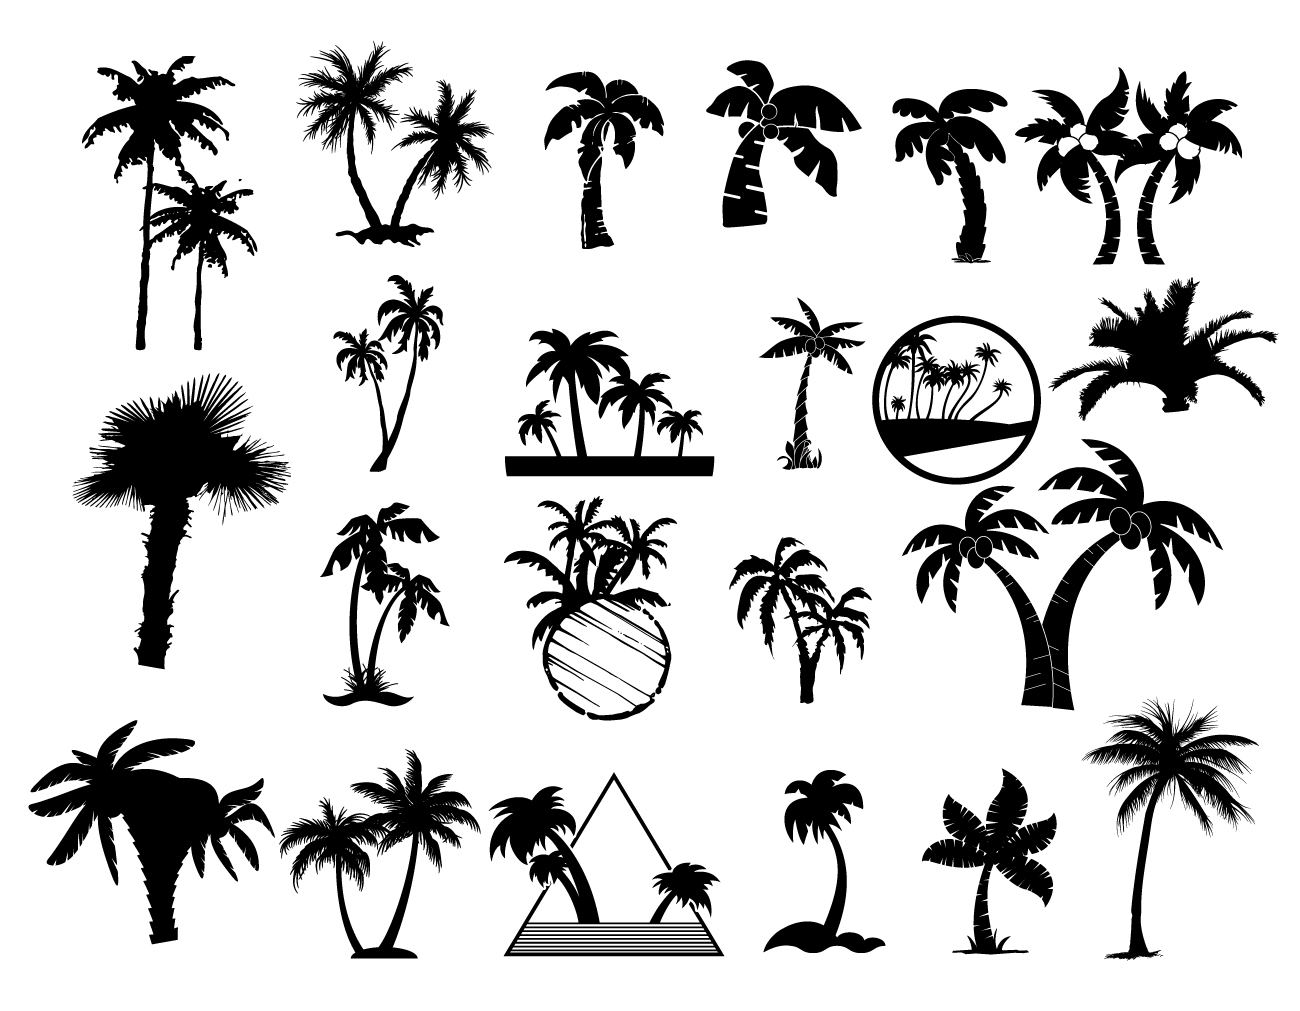 Silhouettes of palm trees vector